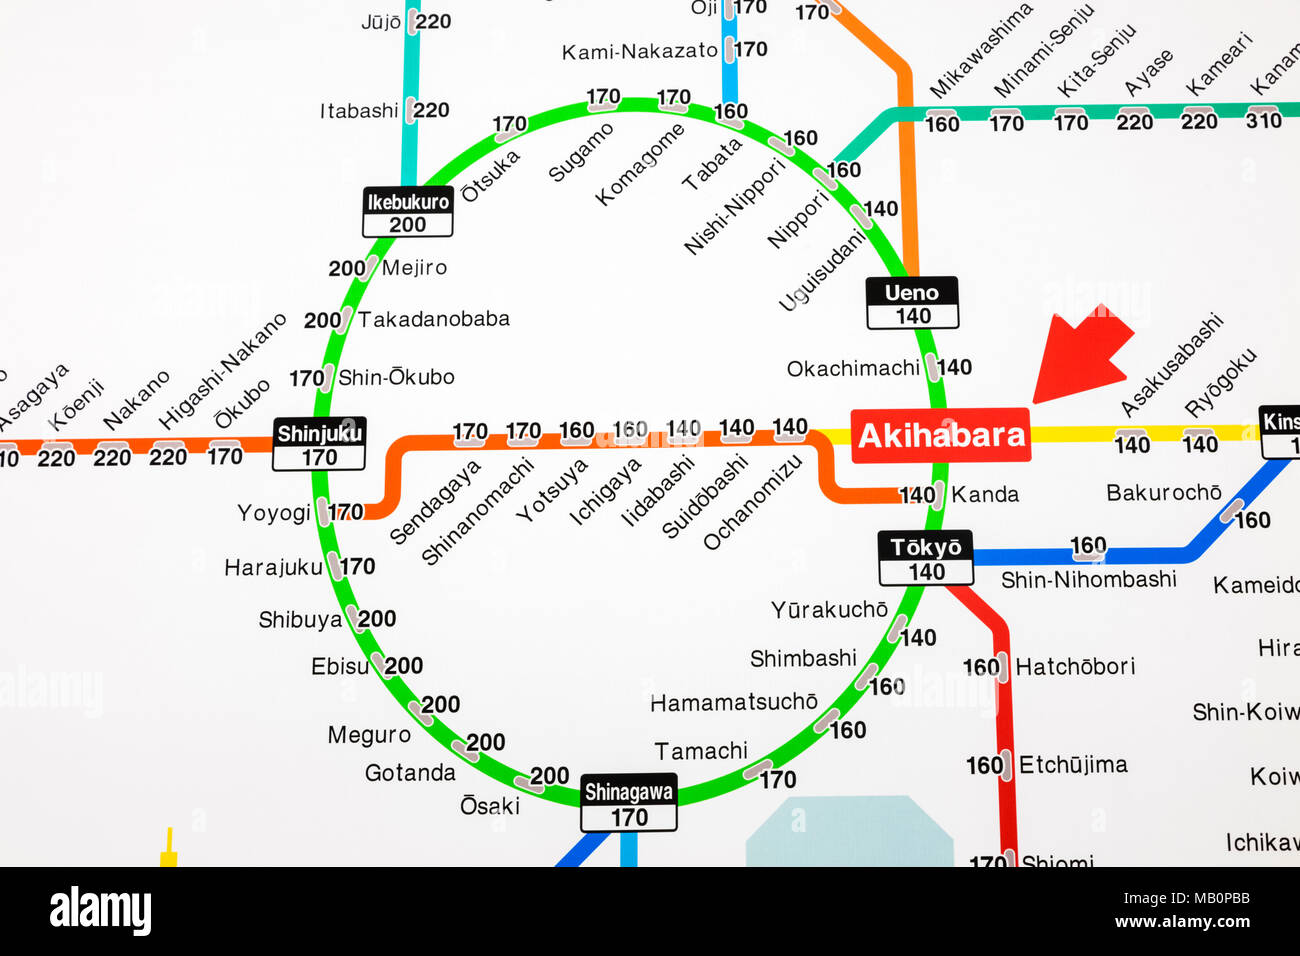 Japan, Honshu, Tokyo, Akihabara Station, Train Network Map showing Ticket Prices to Various Destinations in English Stock Photo